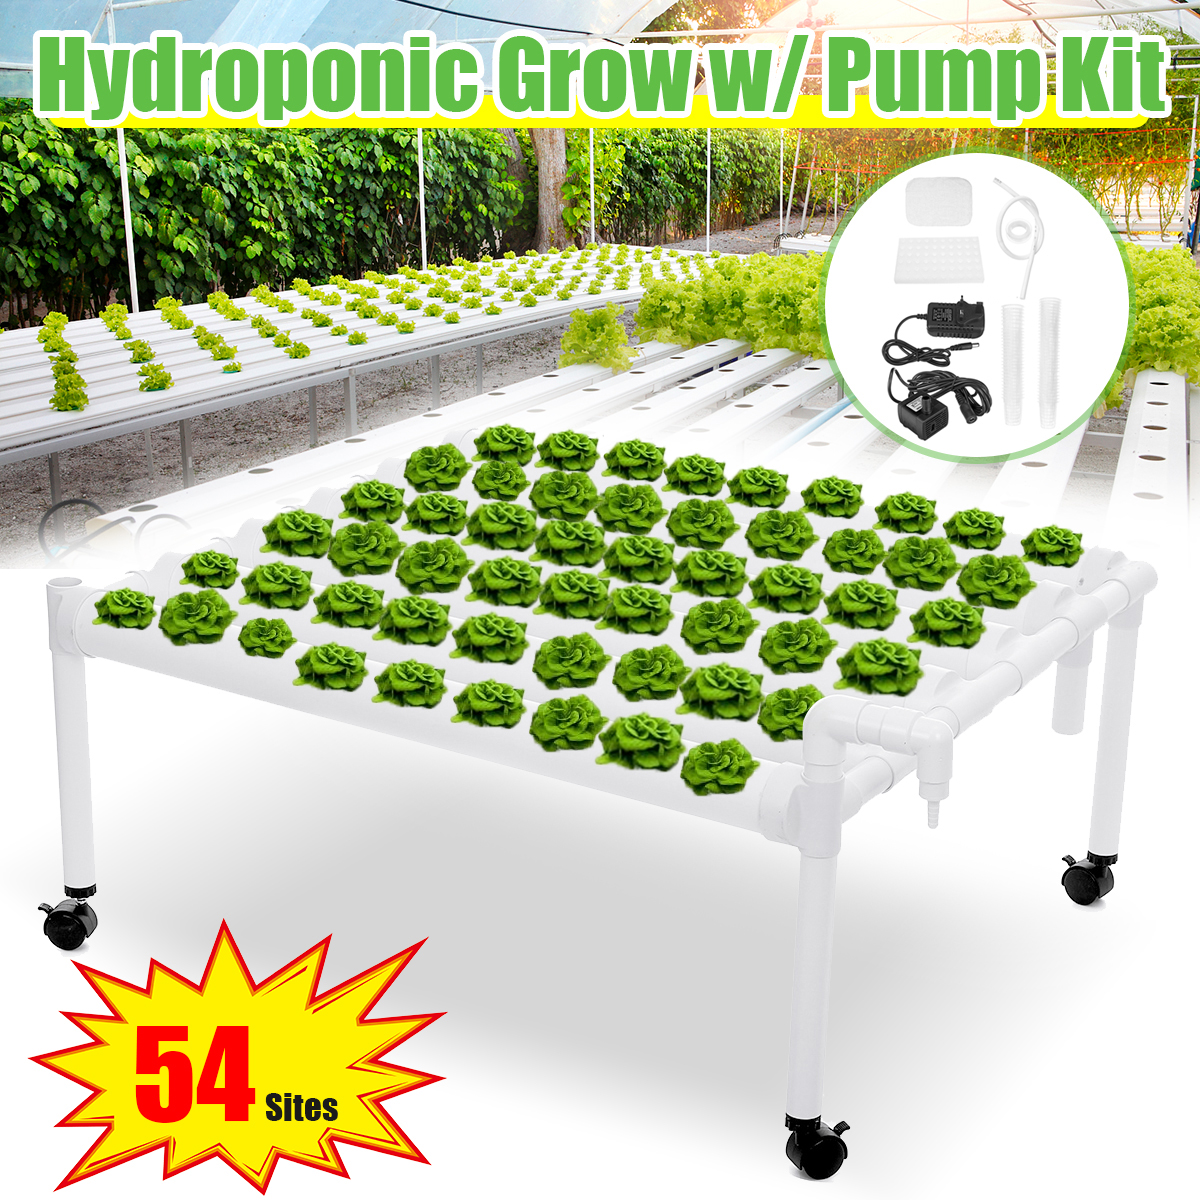 Garfans-110-220V-1-Layer-Hydroponic-Growing-Kit-6-Pipes-54-Holes-Vertical-Style-Double-Side-Water-Cu-1937405-1